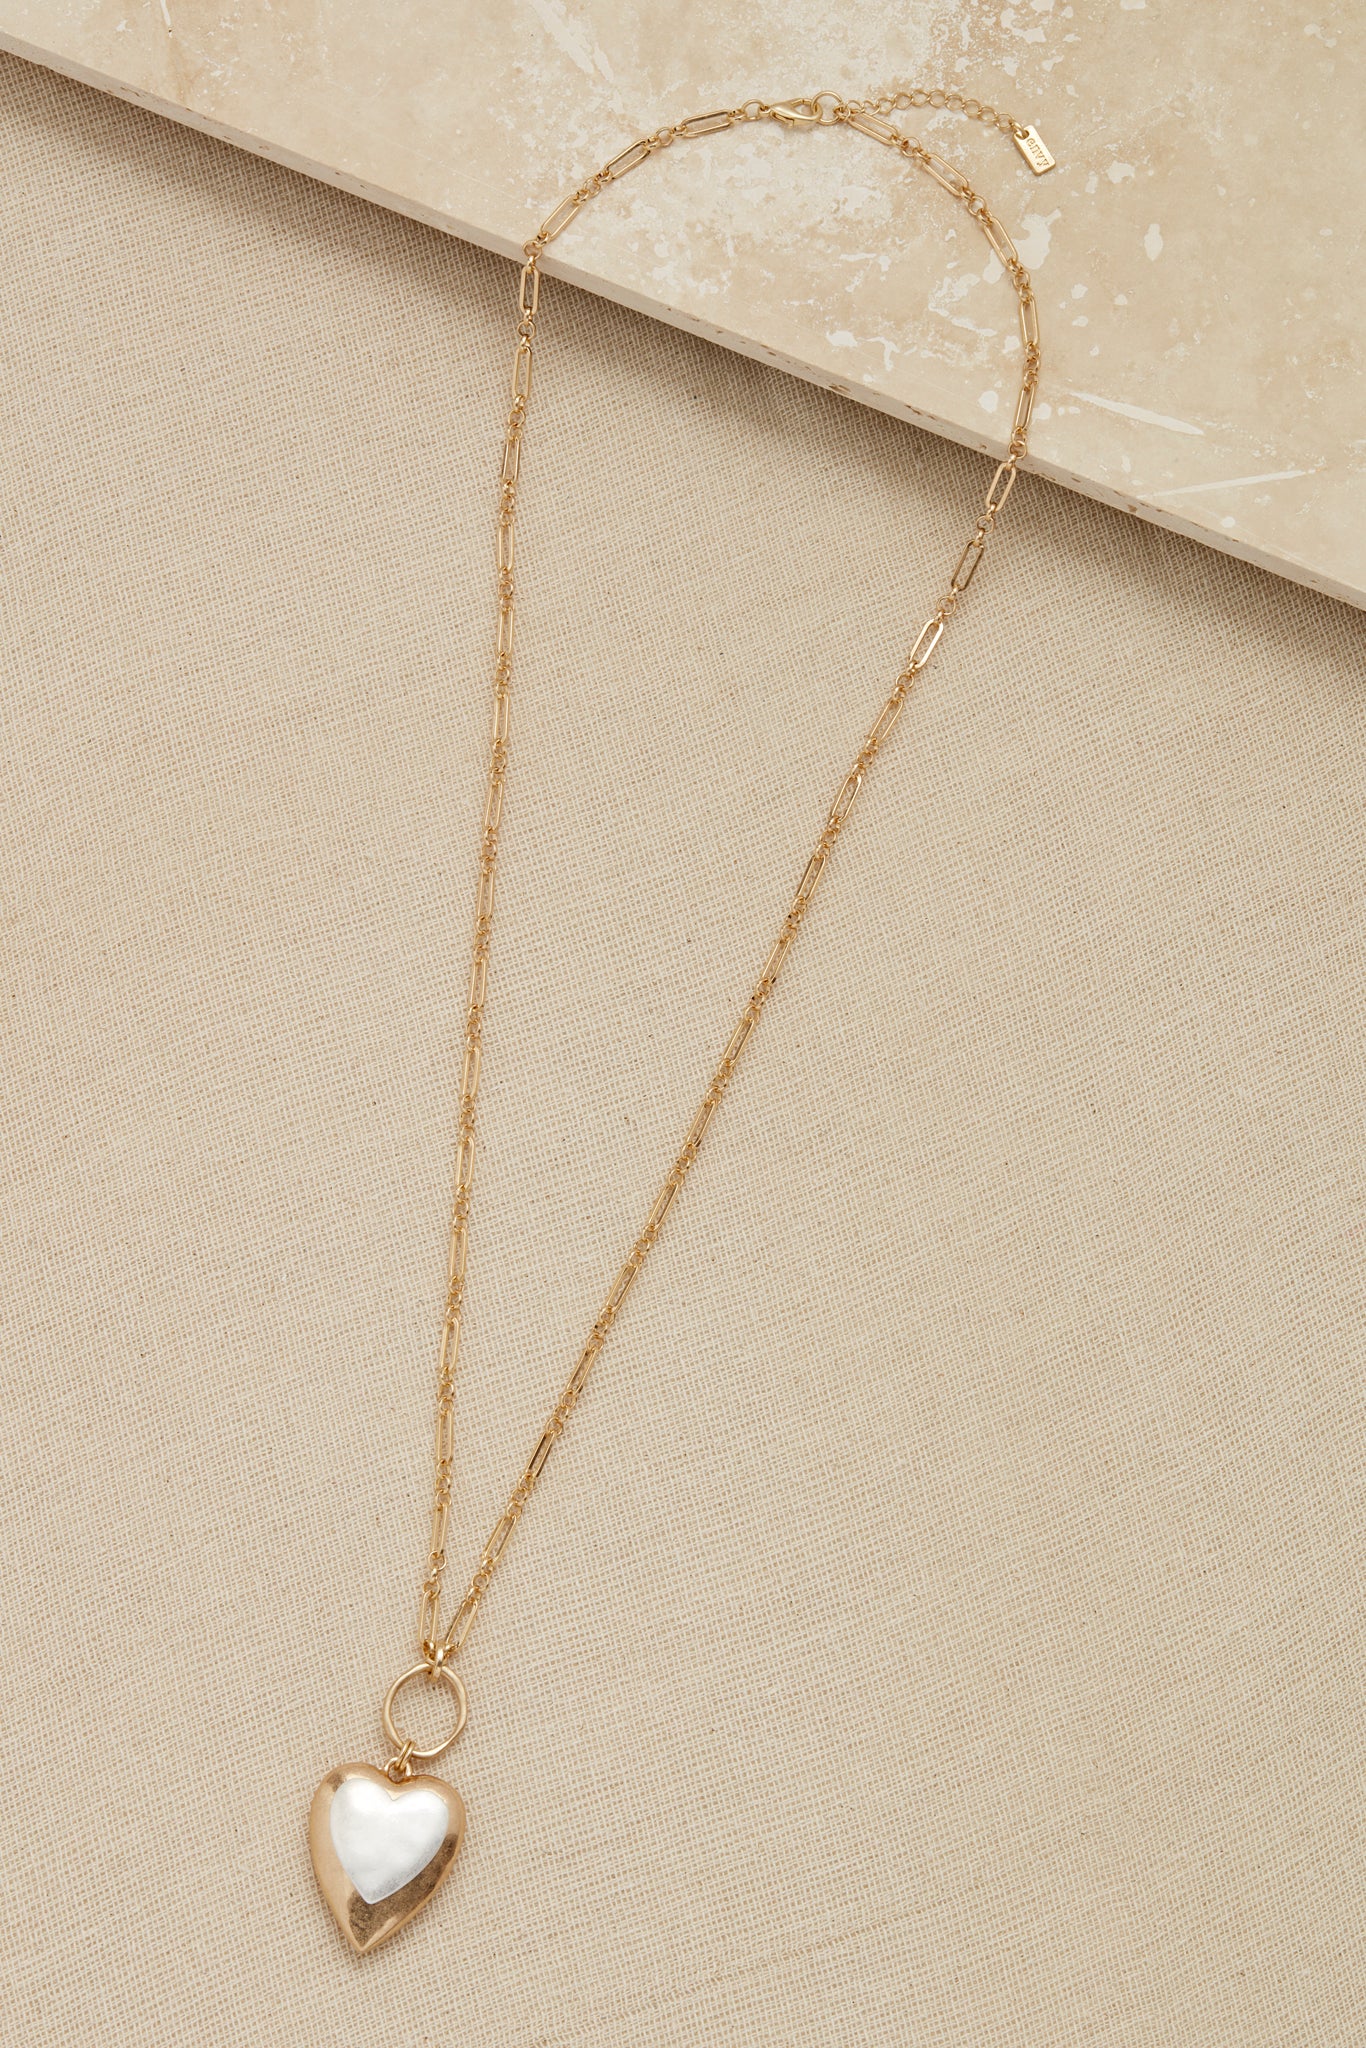 Gold Two Tone Heart Necklace